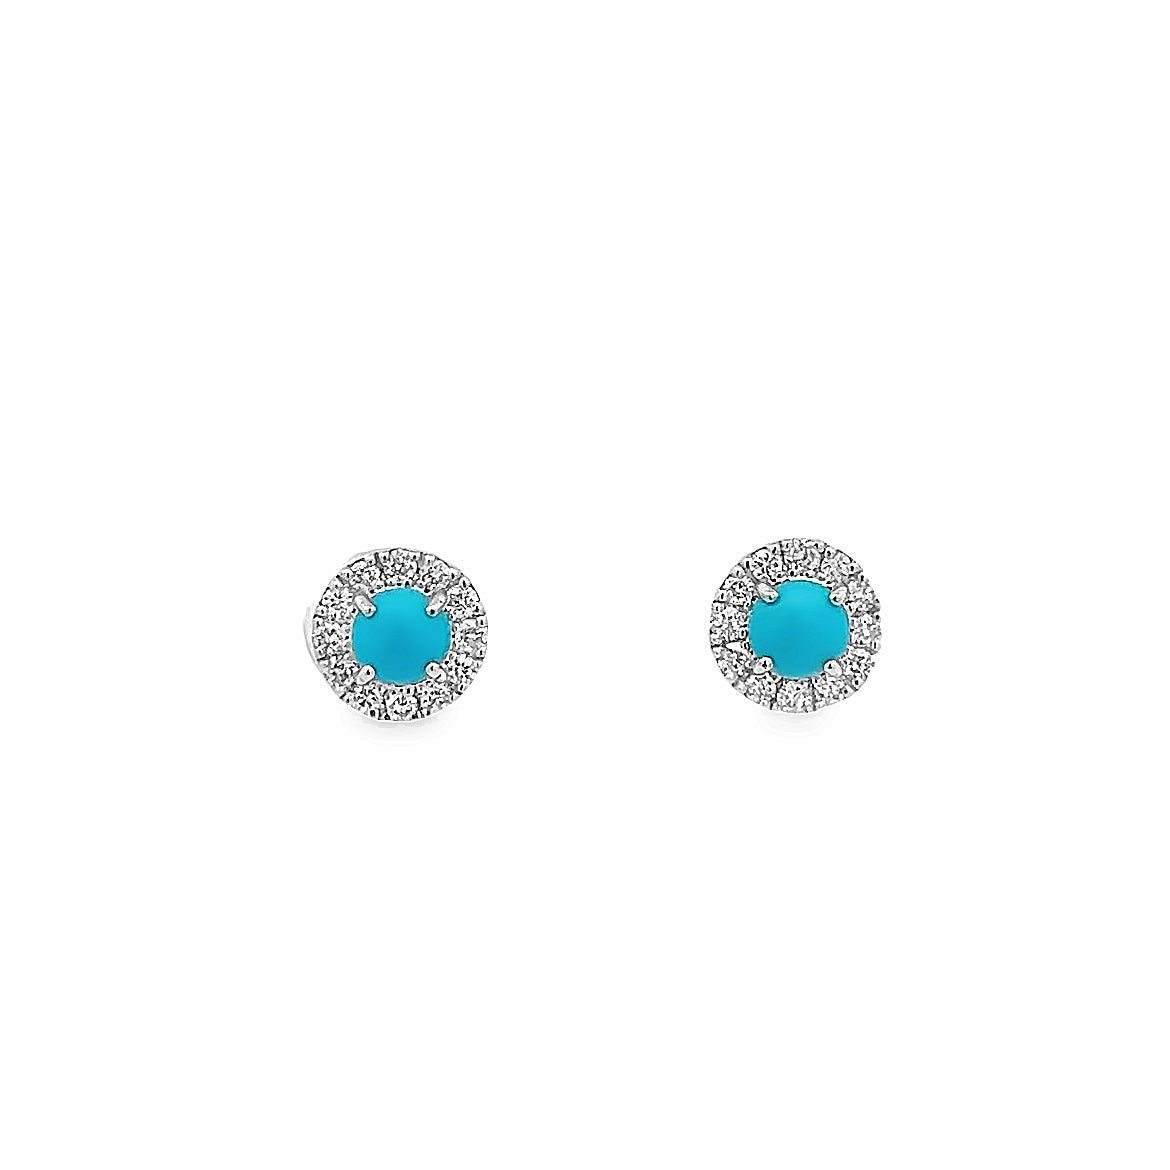 18K WHITE GOLD STUDS HALO EARRINGS WITH TURQUOISE